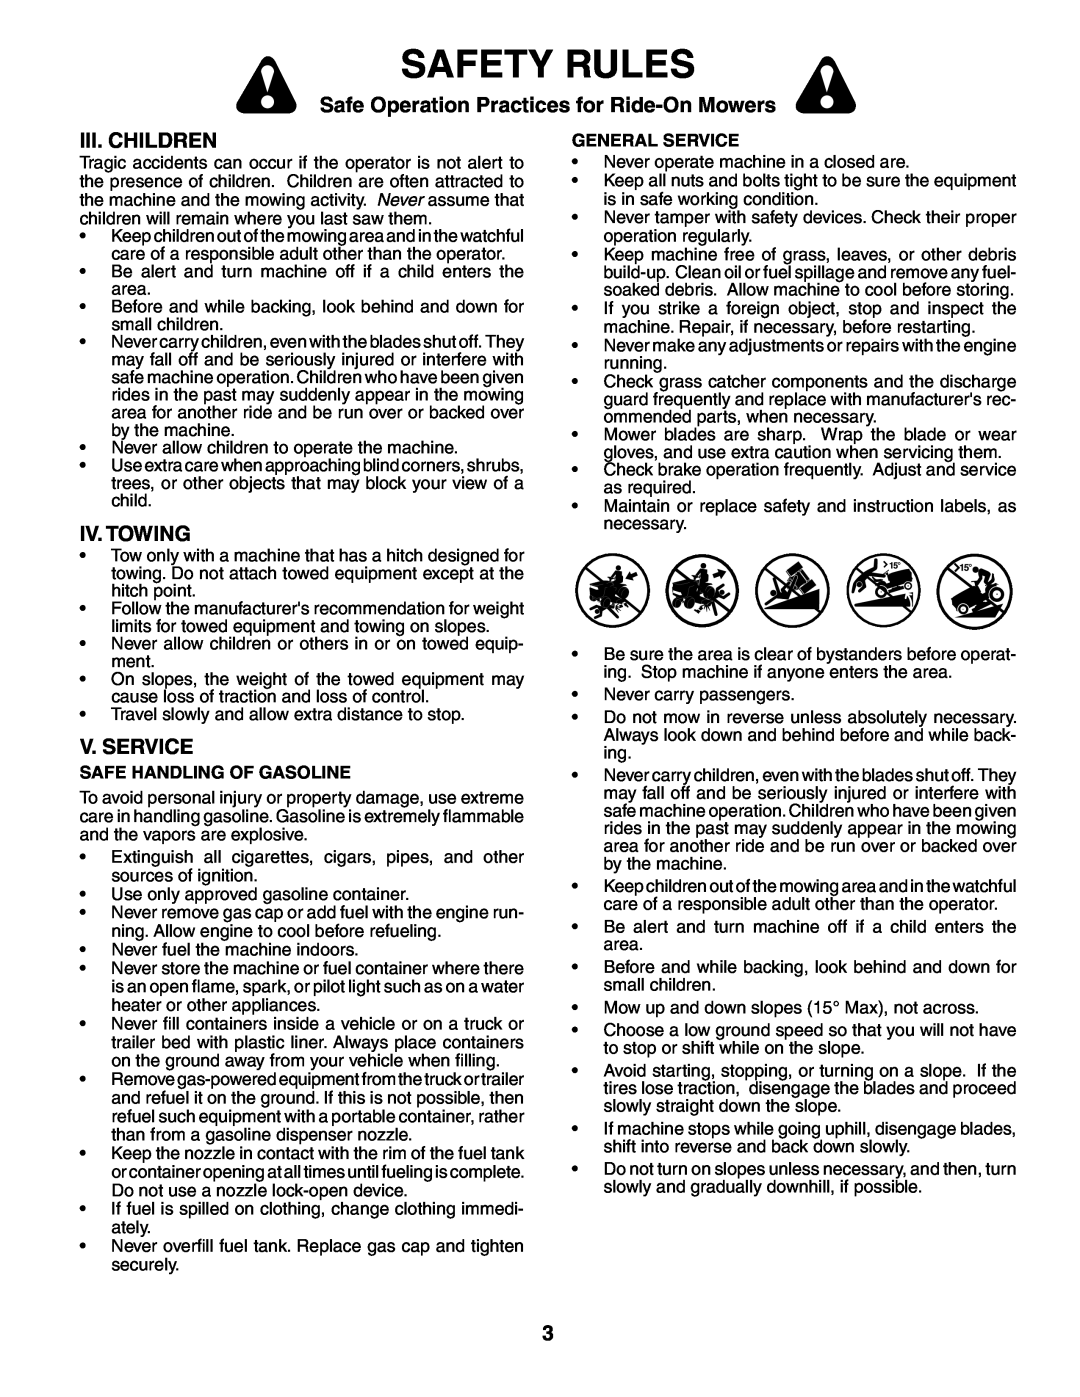 Poulan 196085 manual Iii. Children, Iv. Towing, V. Service, Safety Rules, Safe Operation Practices for Ride-On Mowers 